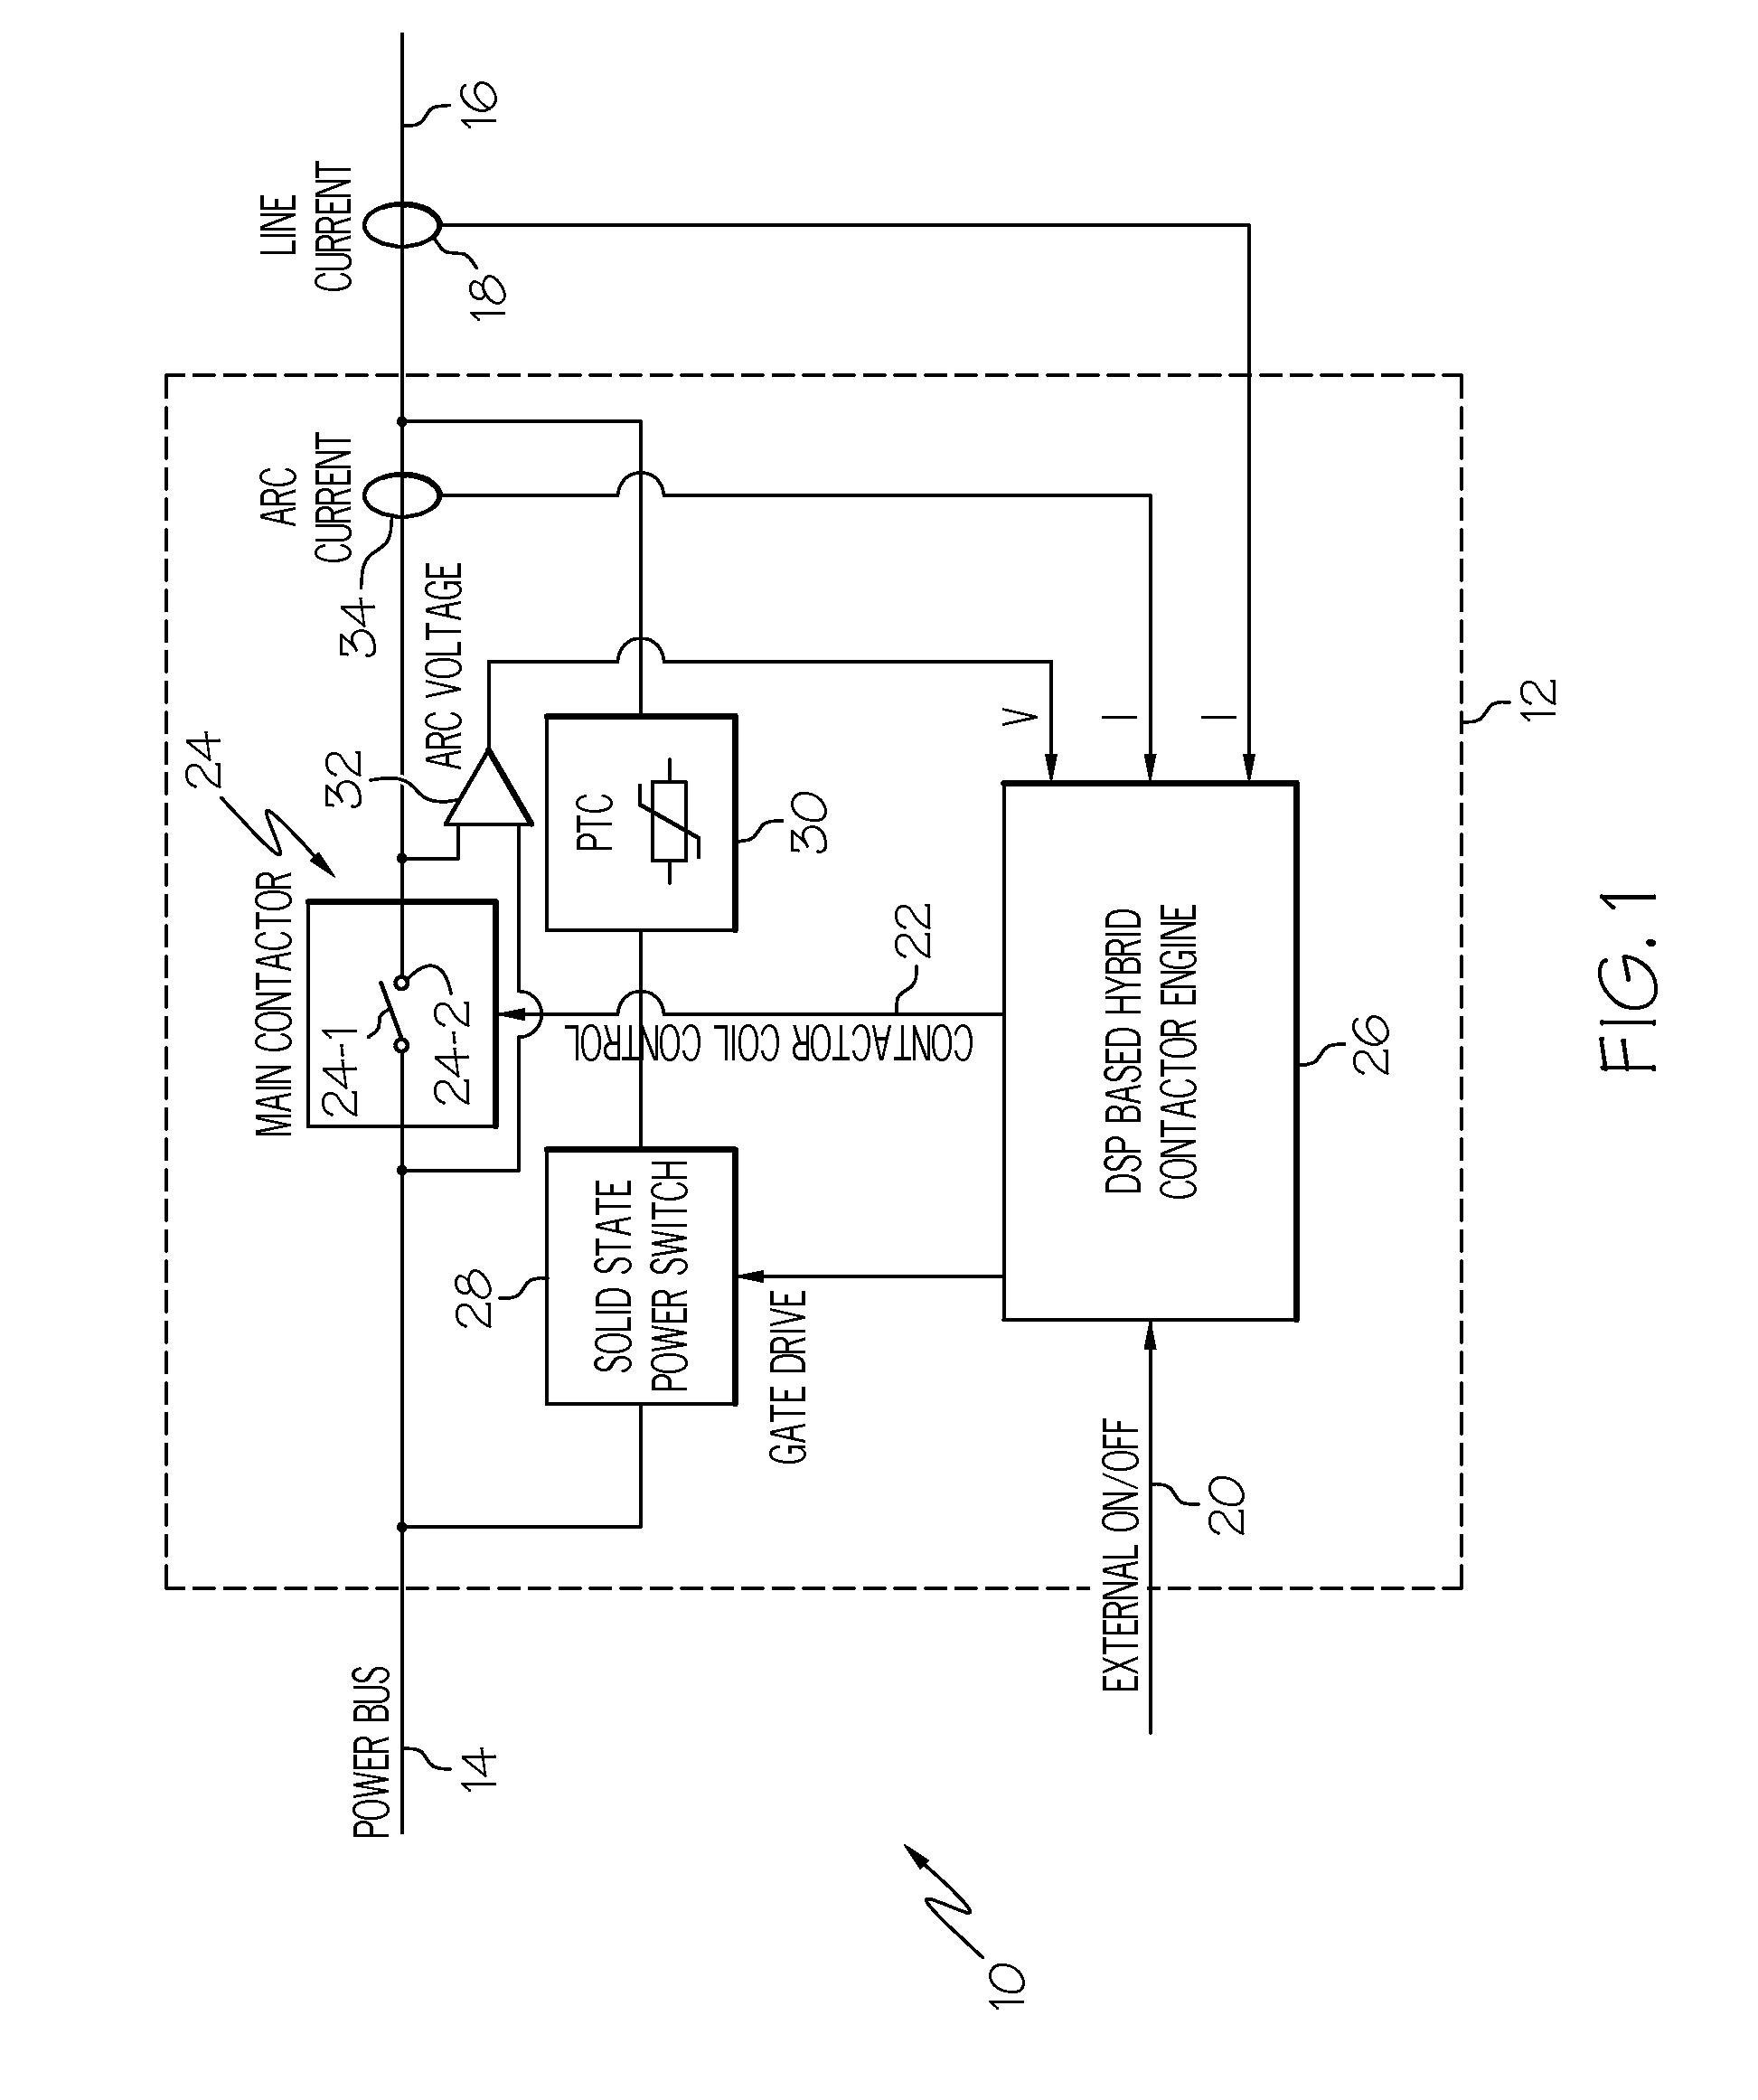 Controlling arc energy in a hybrid high voltage DC contactor